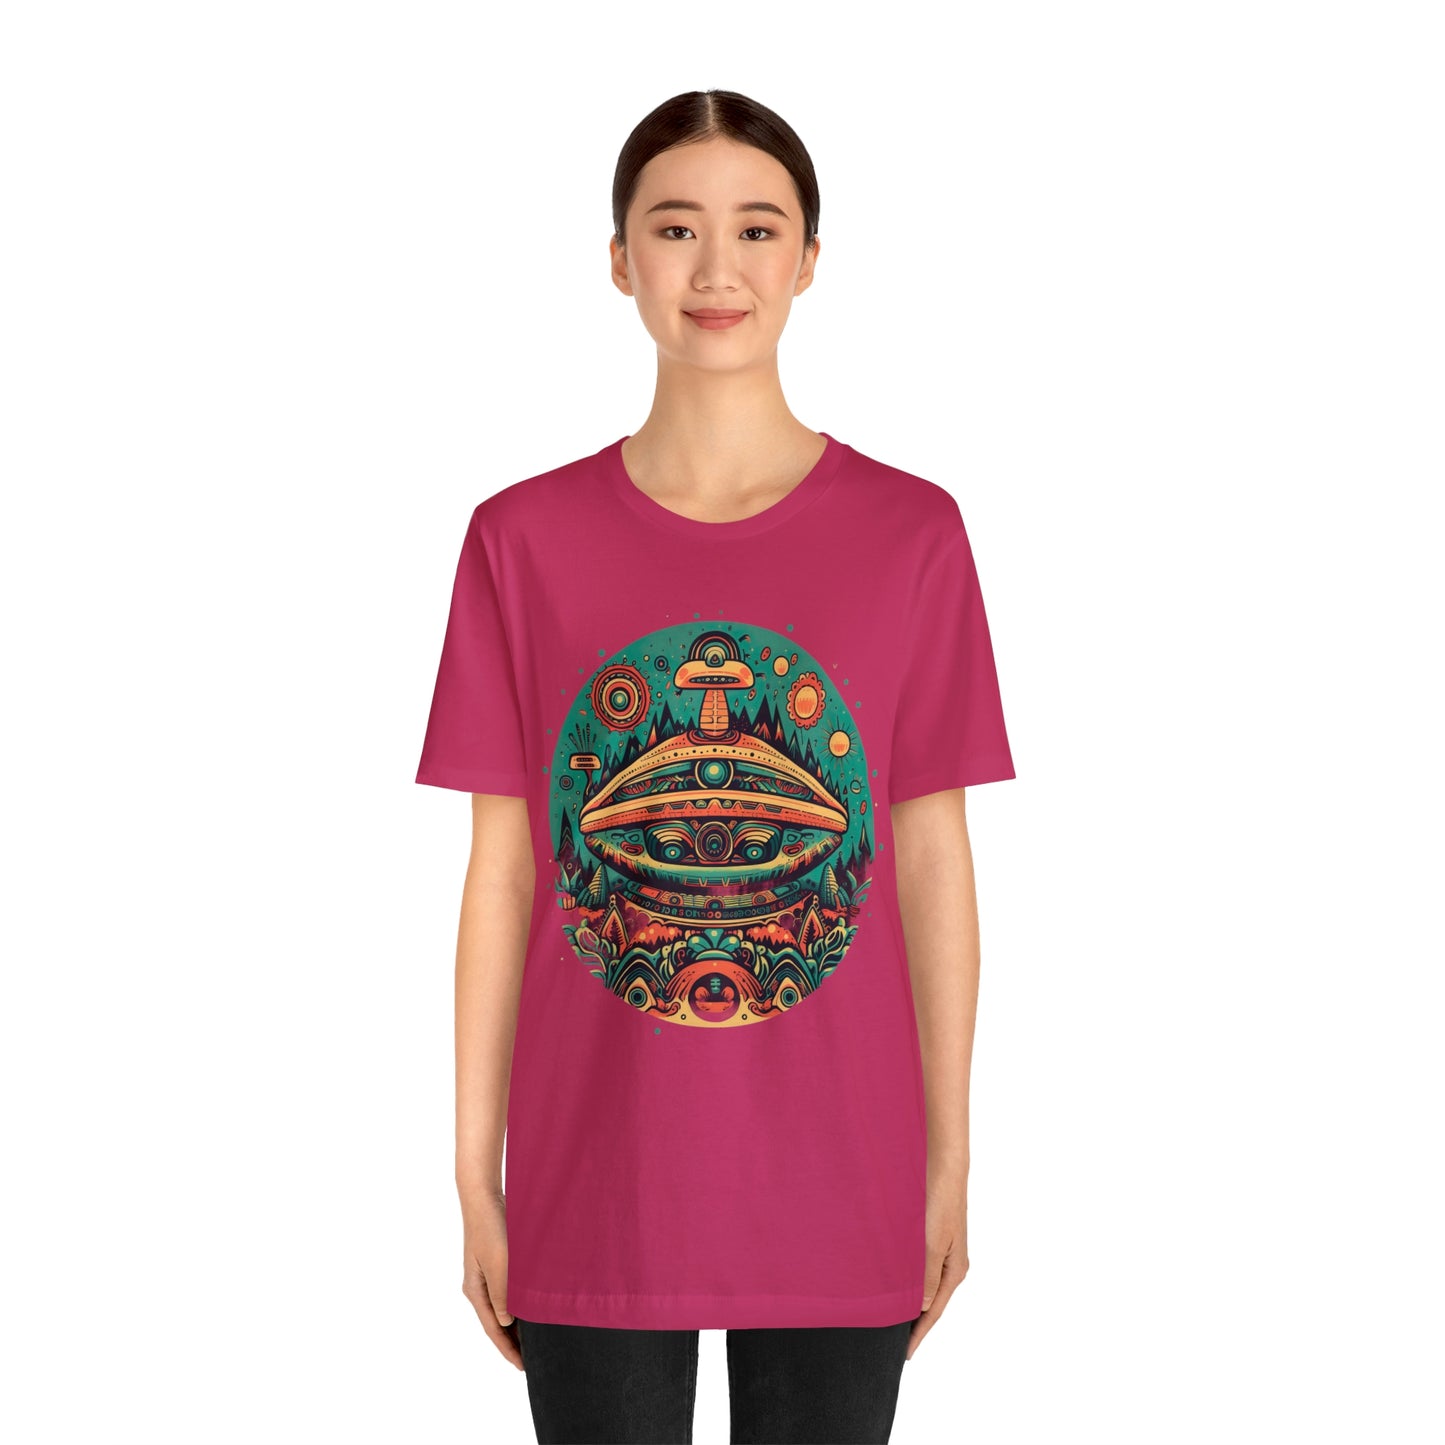 Azteca Ancient Alien Spaceship T-Shirt: Embrace the Cosmos and Unite in Universal Power